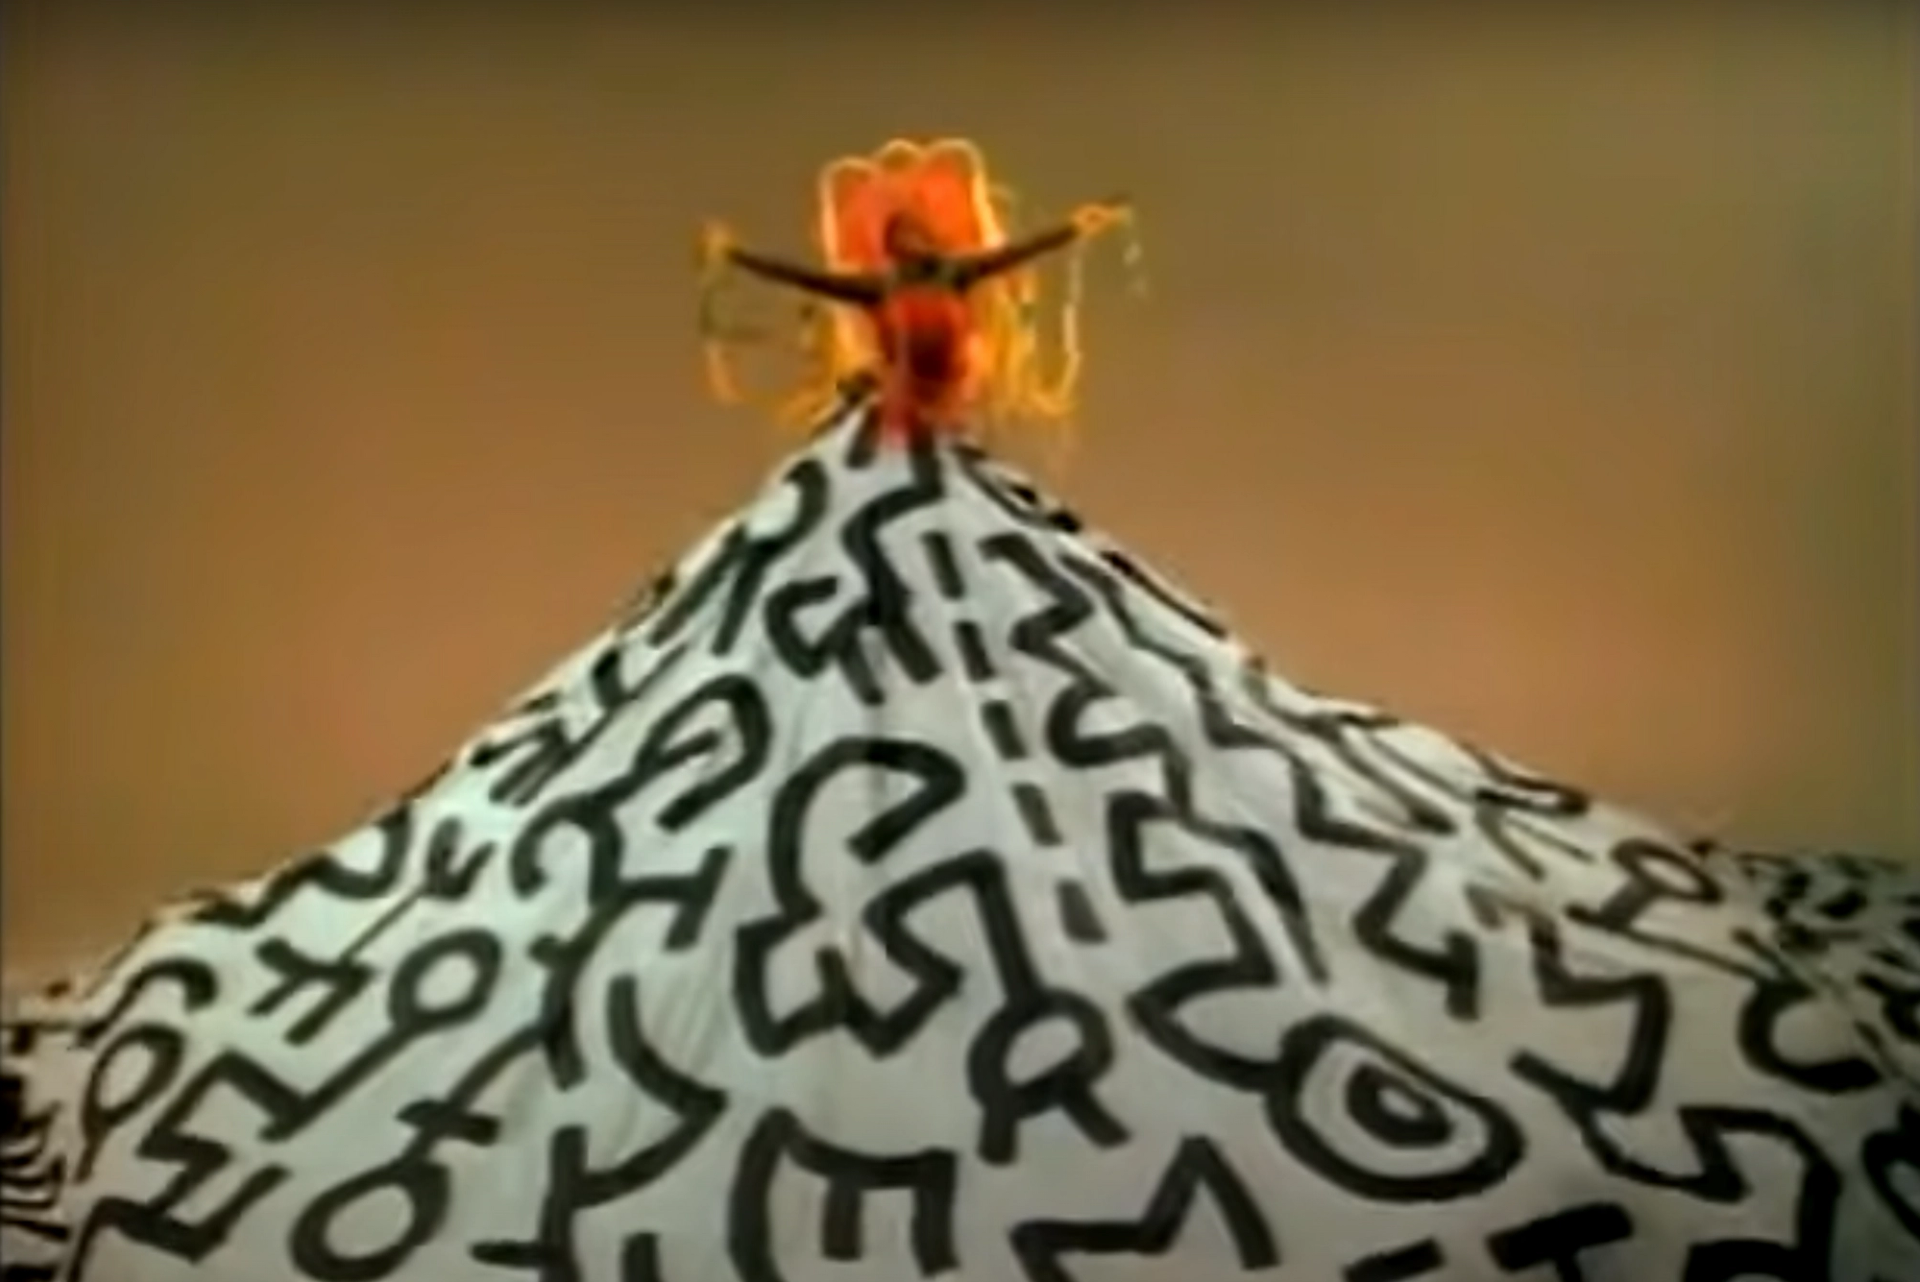 A screenshot of artist Grace Jones, raised up high with a giant skirt decorated with monochromatic Keith Haring motifs.